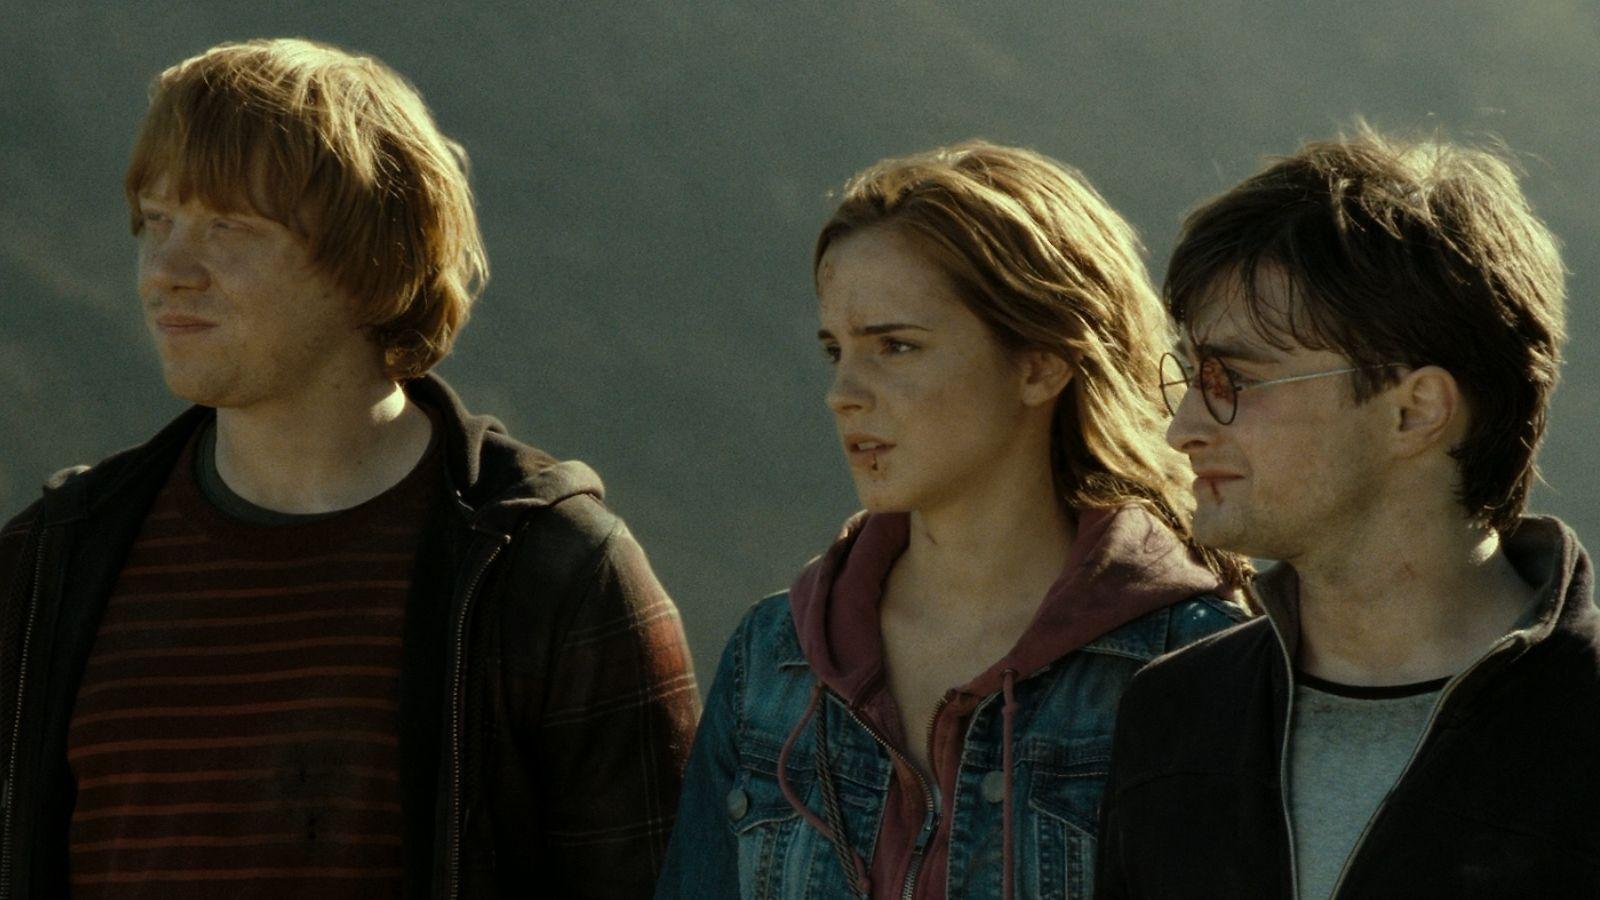 Emma Watson as Hermione Granger, Rupert Grint as Ron Weasley, and Daniel Radcliffe as Harry Potter in Deathly Hallows Part 2.